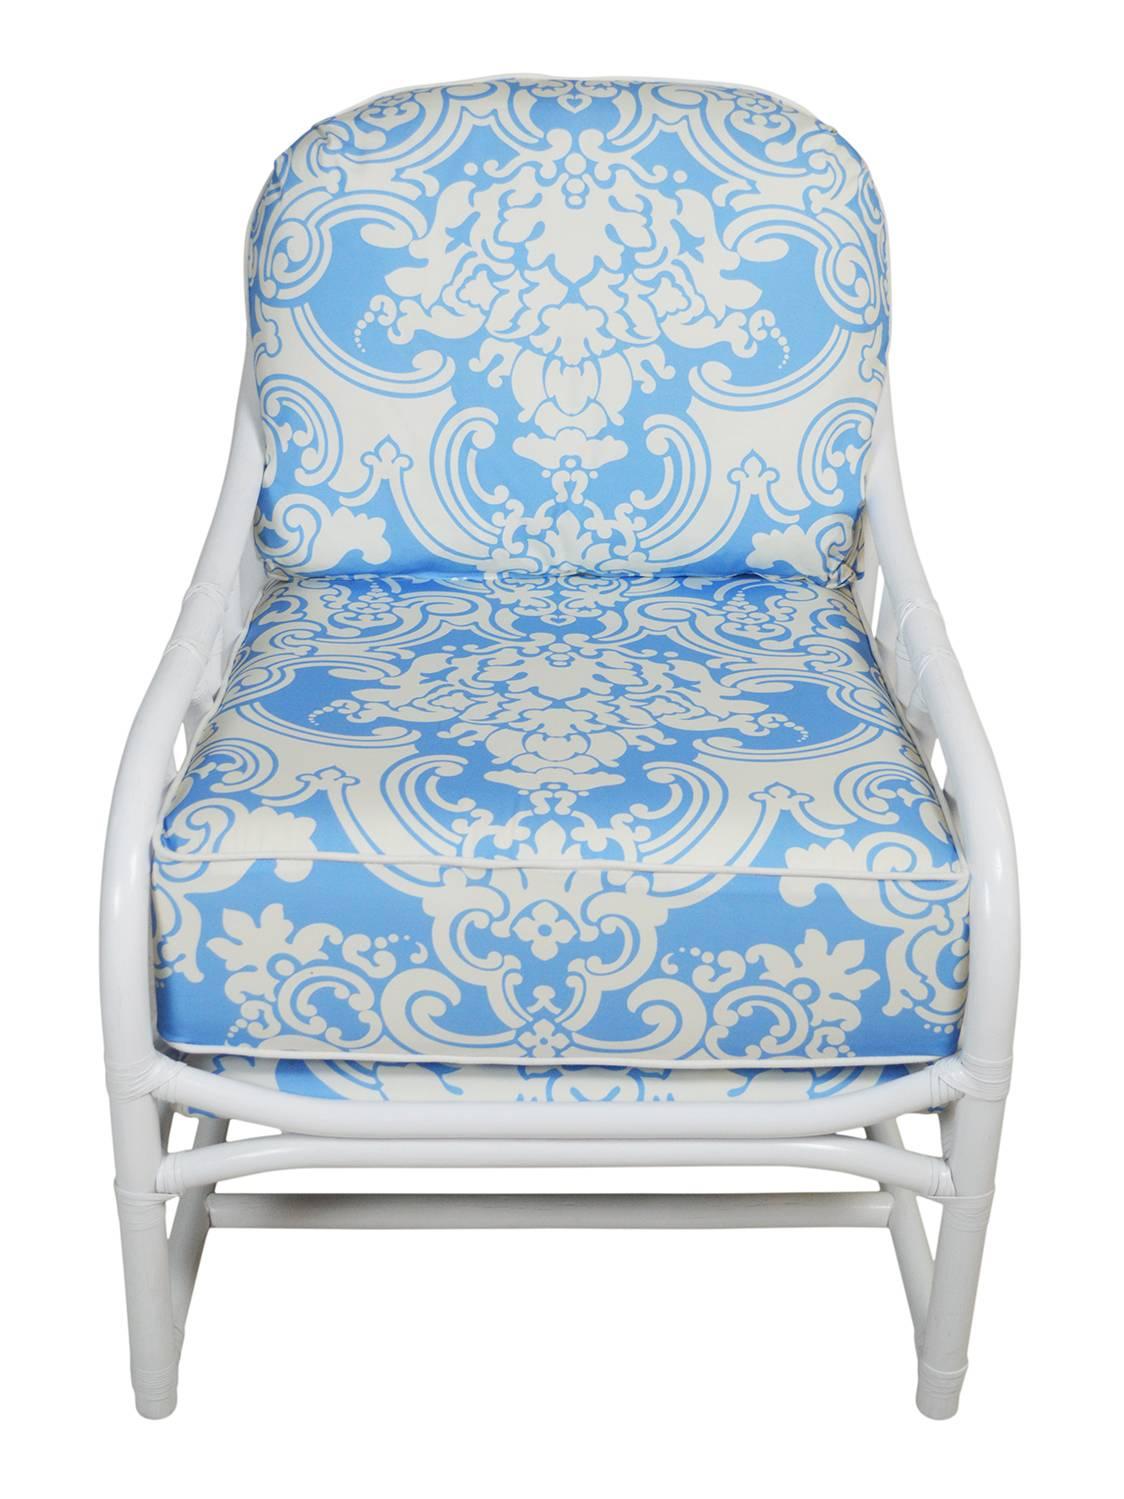 Ficks Reed lounger newly lacquered in white. The rattan frame has gentle sloping arms and leather windings. The new removable cushions and seat frames are upholstered in Scalamandre damask designer fabric.